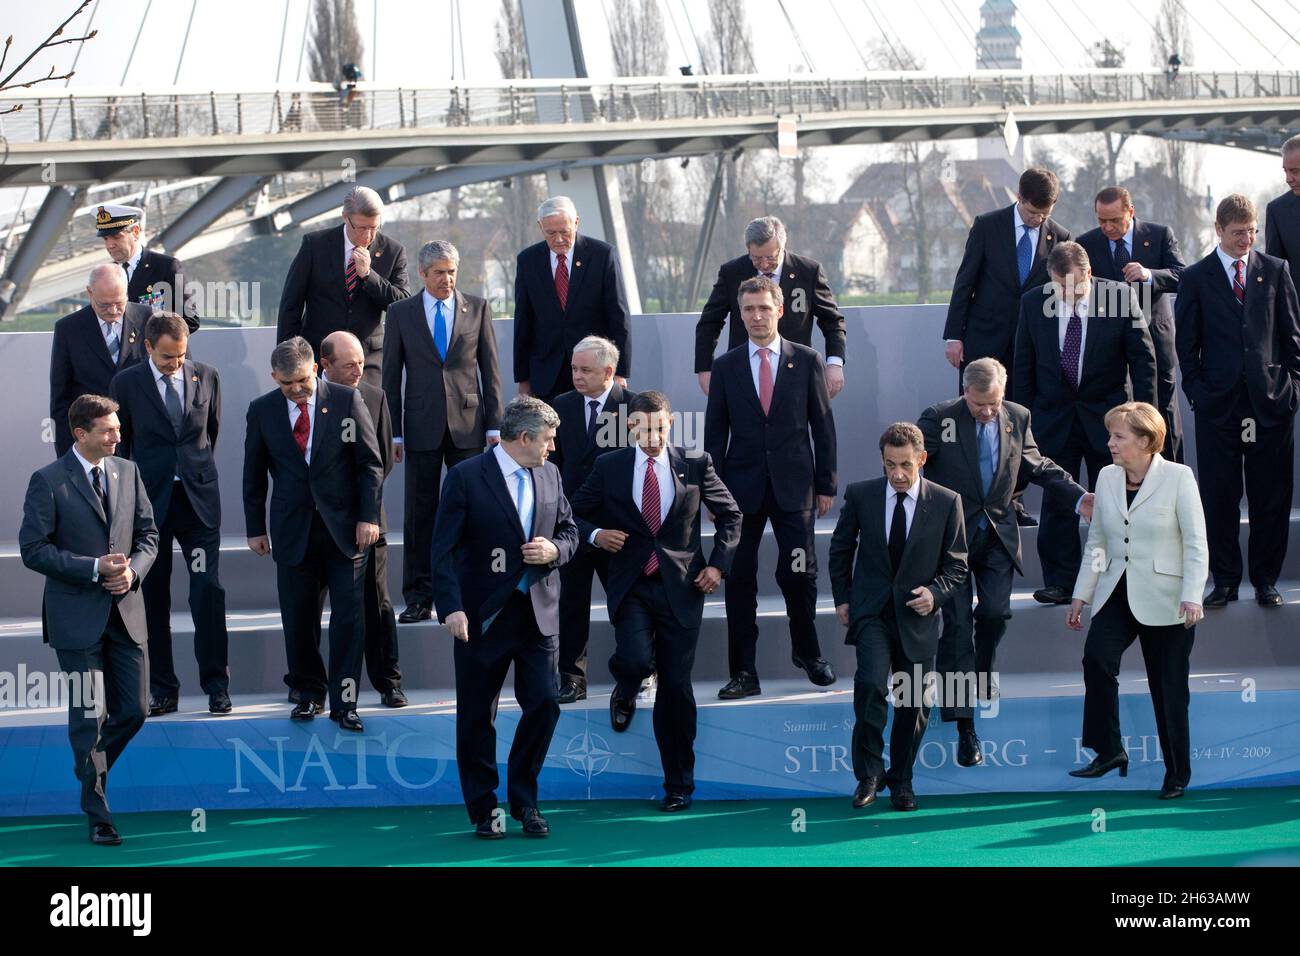 President Barack Obama, NATO Secretary General Jaap de Hoop Scheffer and fellow NATO leaders step down from a photo platform April 4, 2009, following their group photo at the NATO meeting in Strasbourg, France Stock Photo